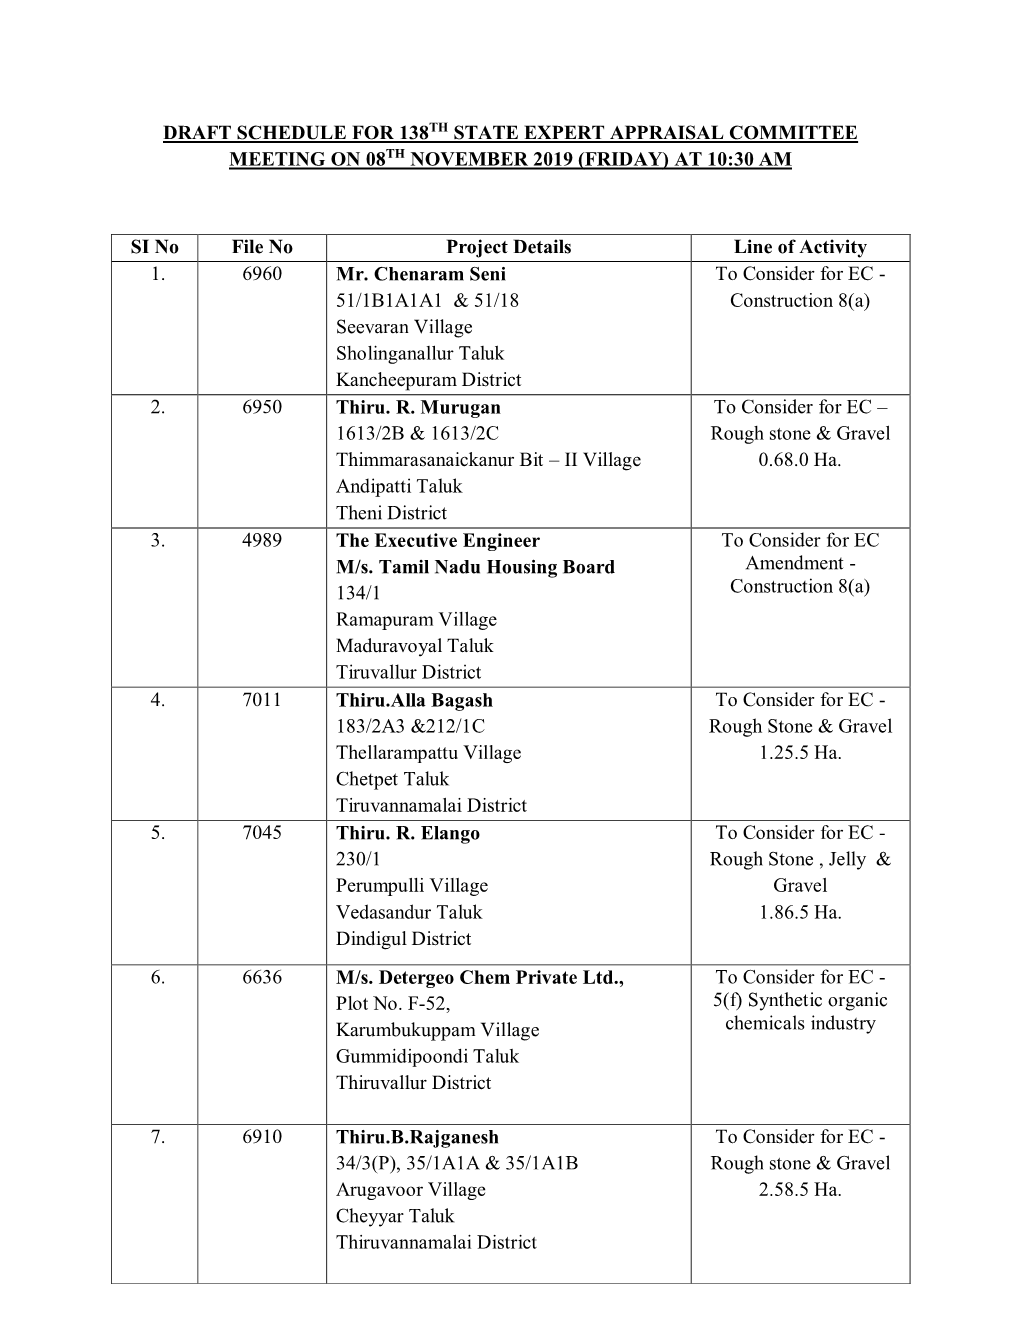 Draft Schedule for 138Th State Expert Appraisal Committee Meeting on 08Th November 2019 (Friday) at 10:30 Am